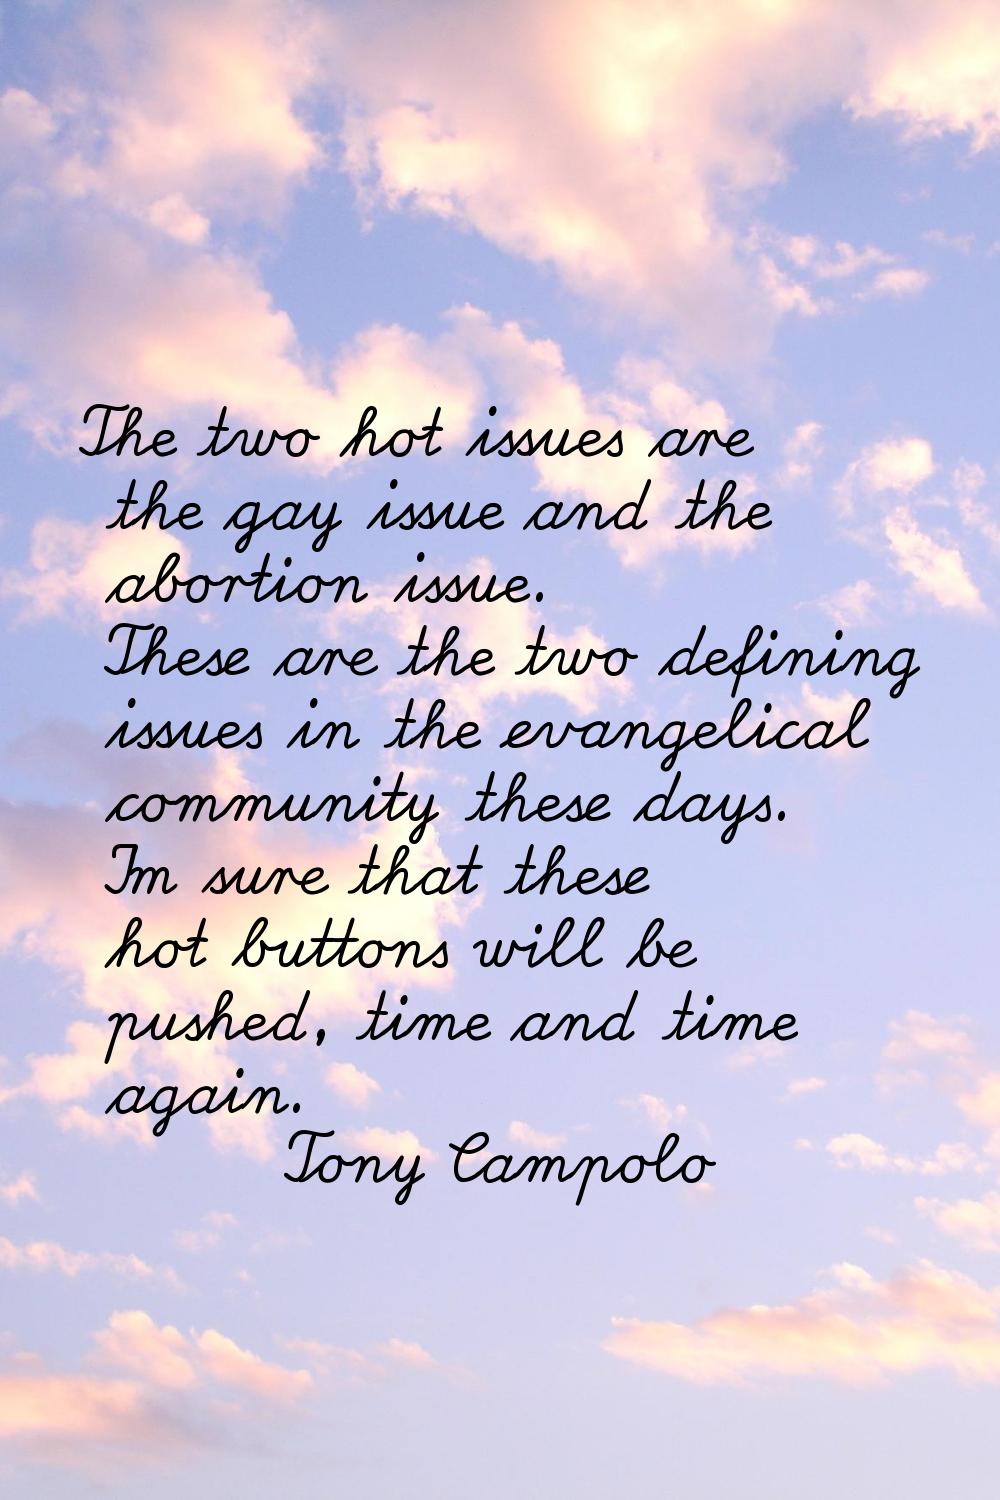 The two hot issues are the gay issue and the abortion issue. These are the two defining issues in t